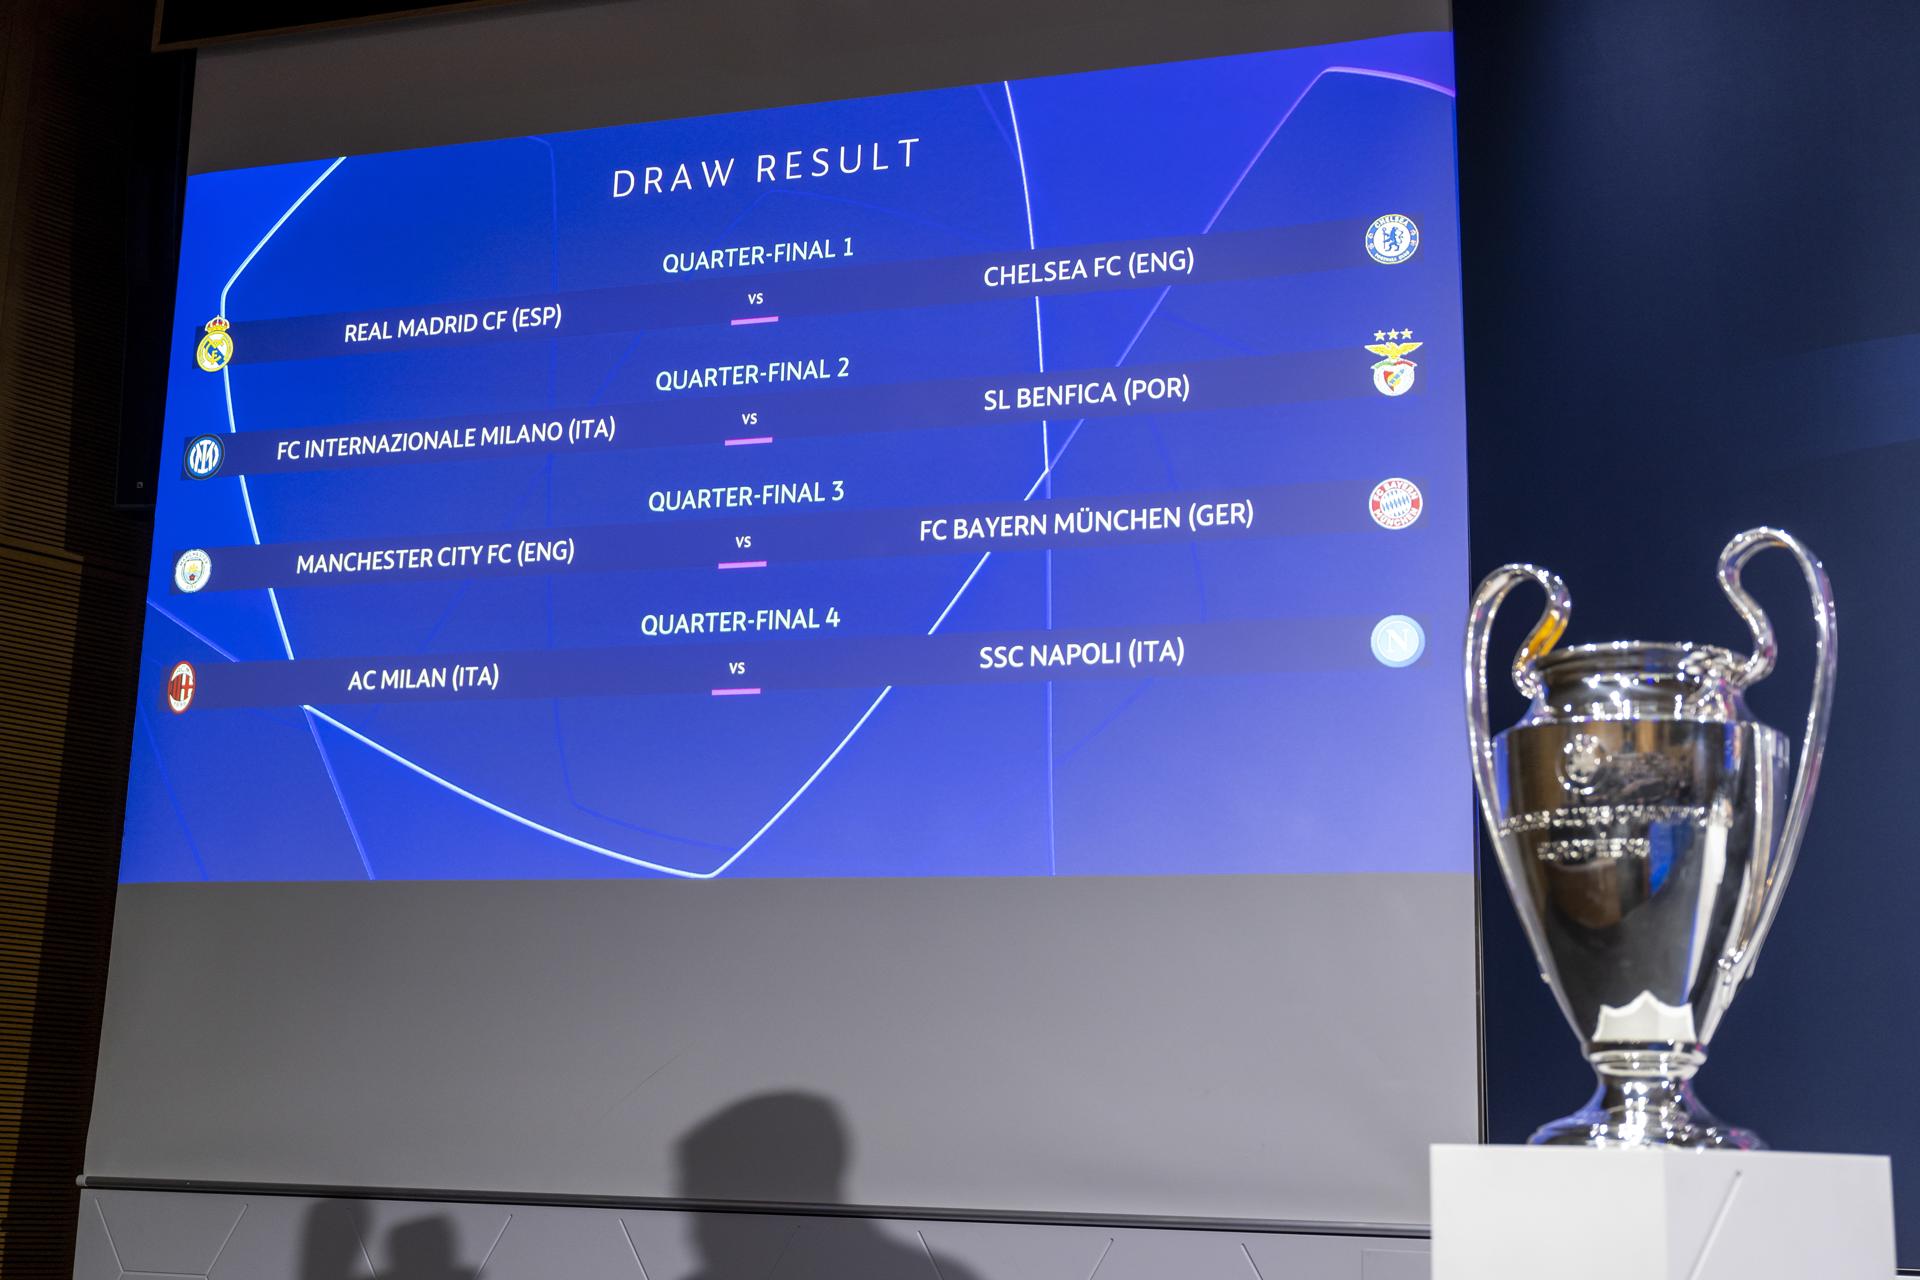 Match fixtures are shown on an electronic panel during the UEFA Champions League 2022/23 round of quarter-final, semi-final and final draw, at the UEFA Headquarters in Nyon, Switzerland 17 March 2023. EFE/EPA/MARTIAL TREZZINI